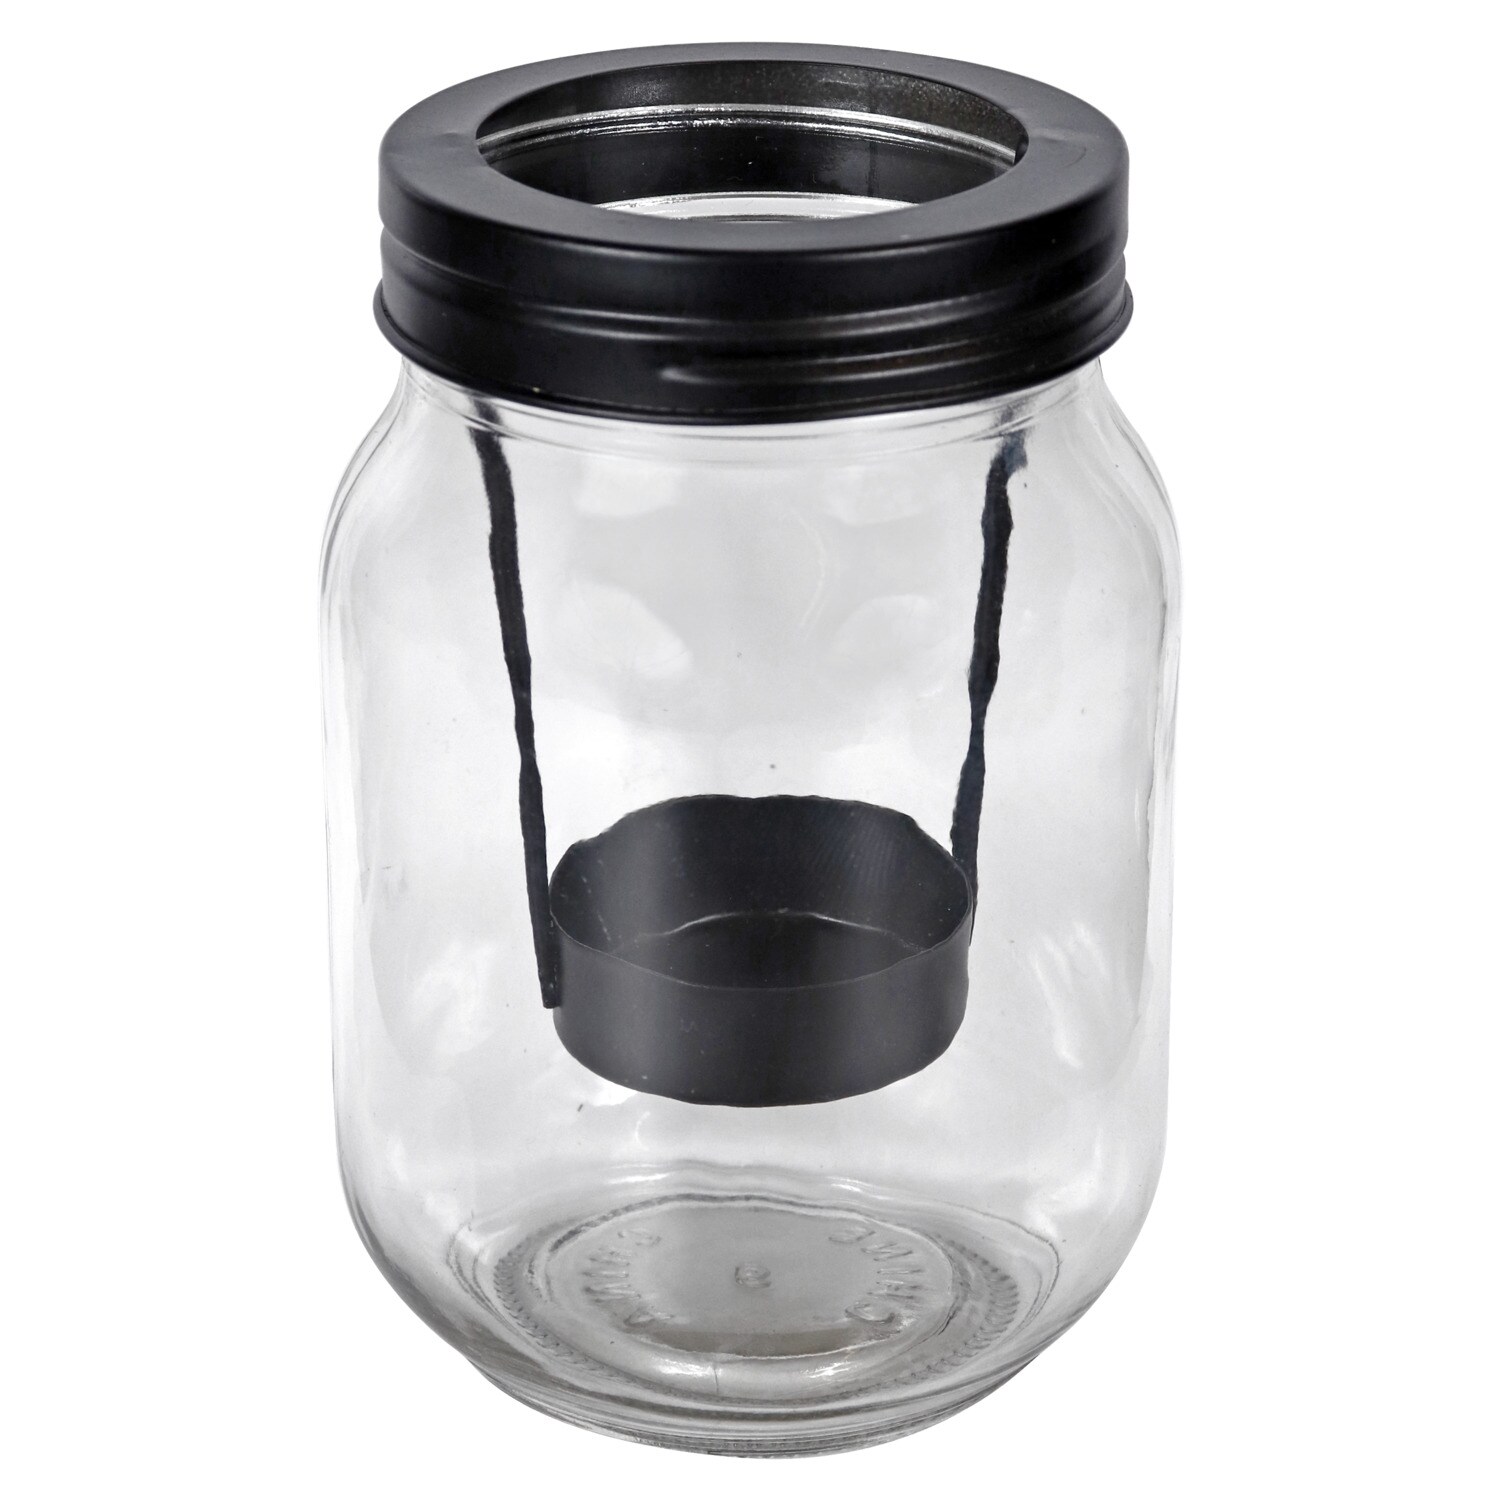 Mason Jar Tea Light Candle Holder with Black Lid and Candle Included 